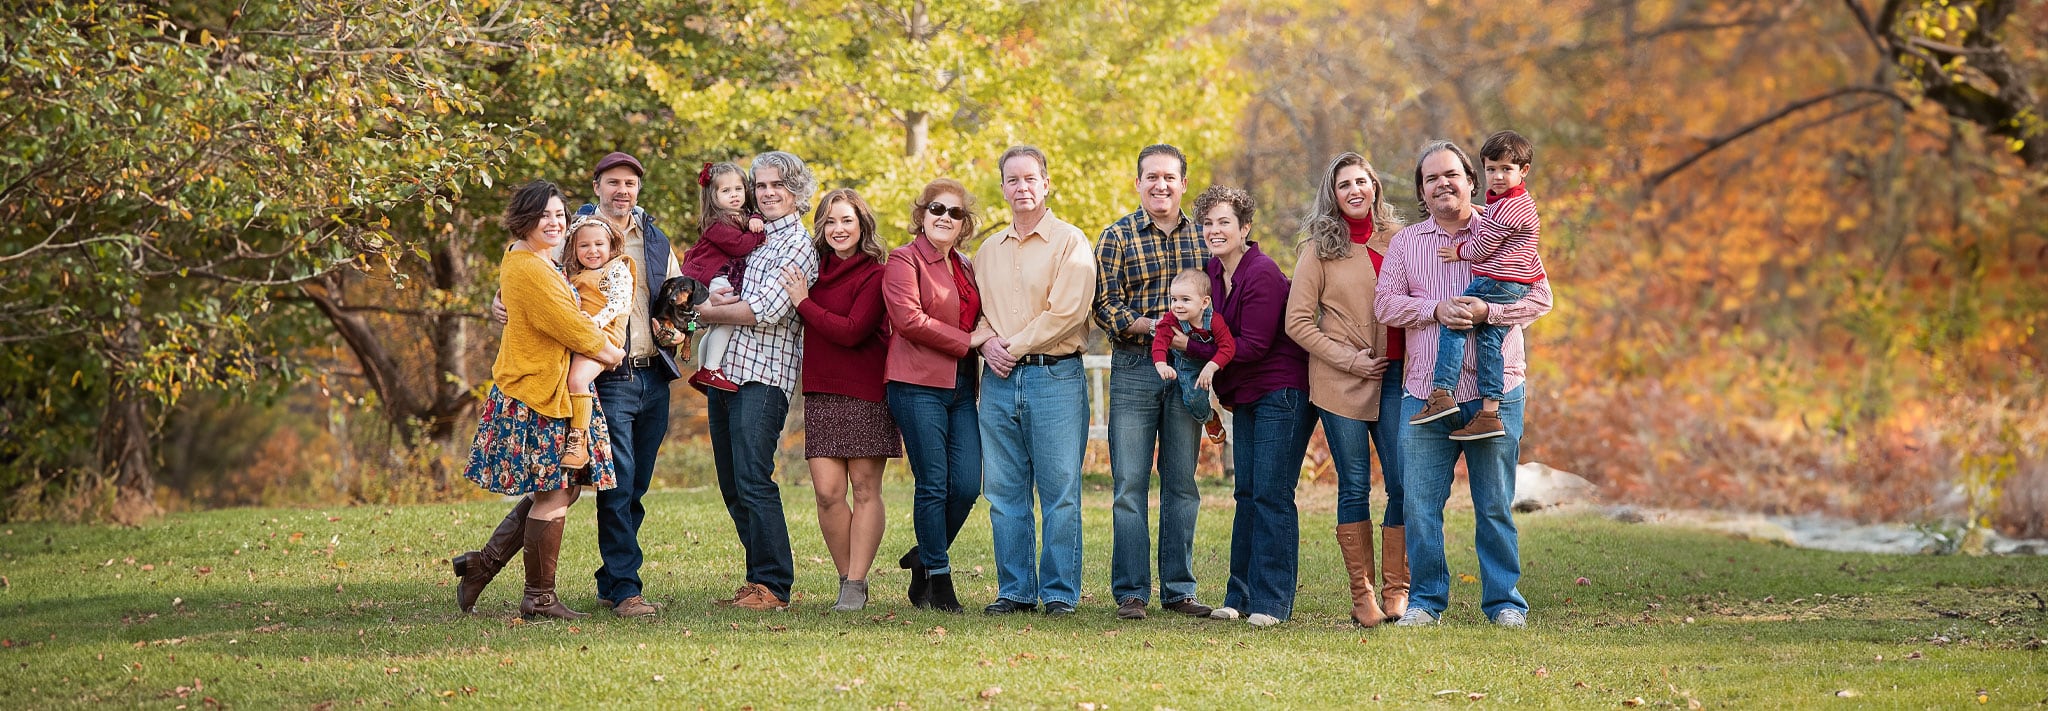 The Importance of Family Portraits